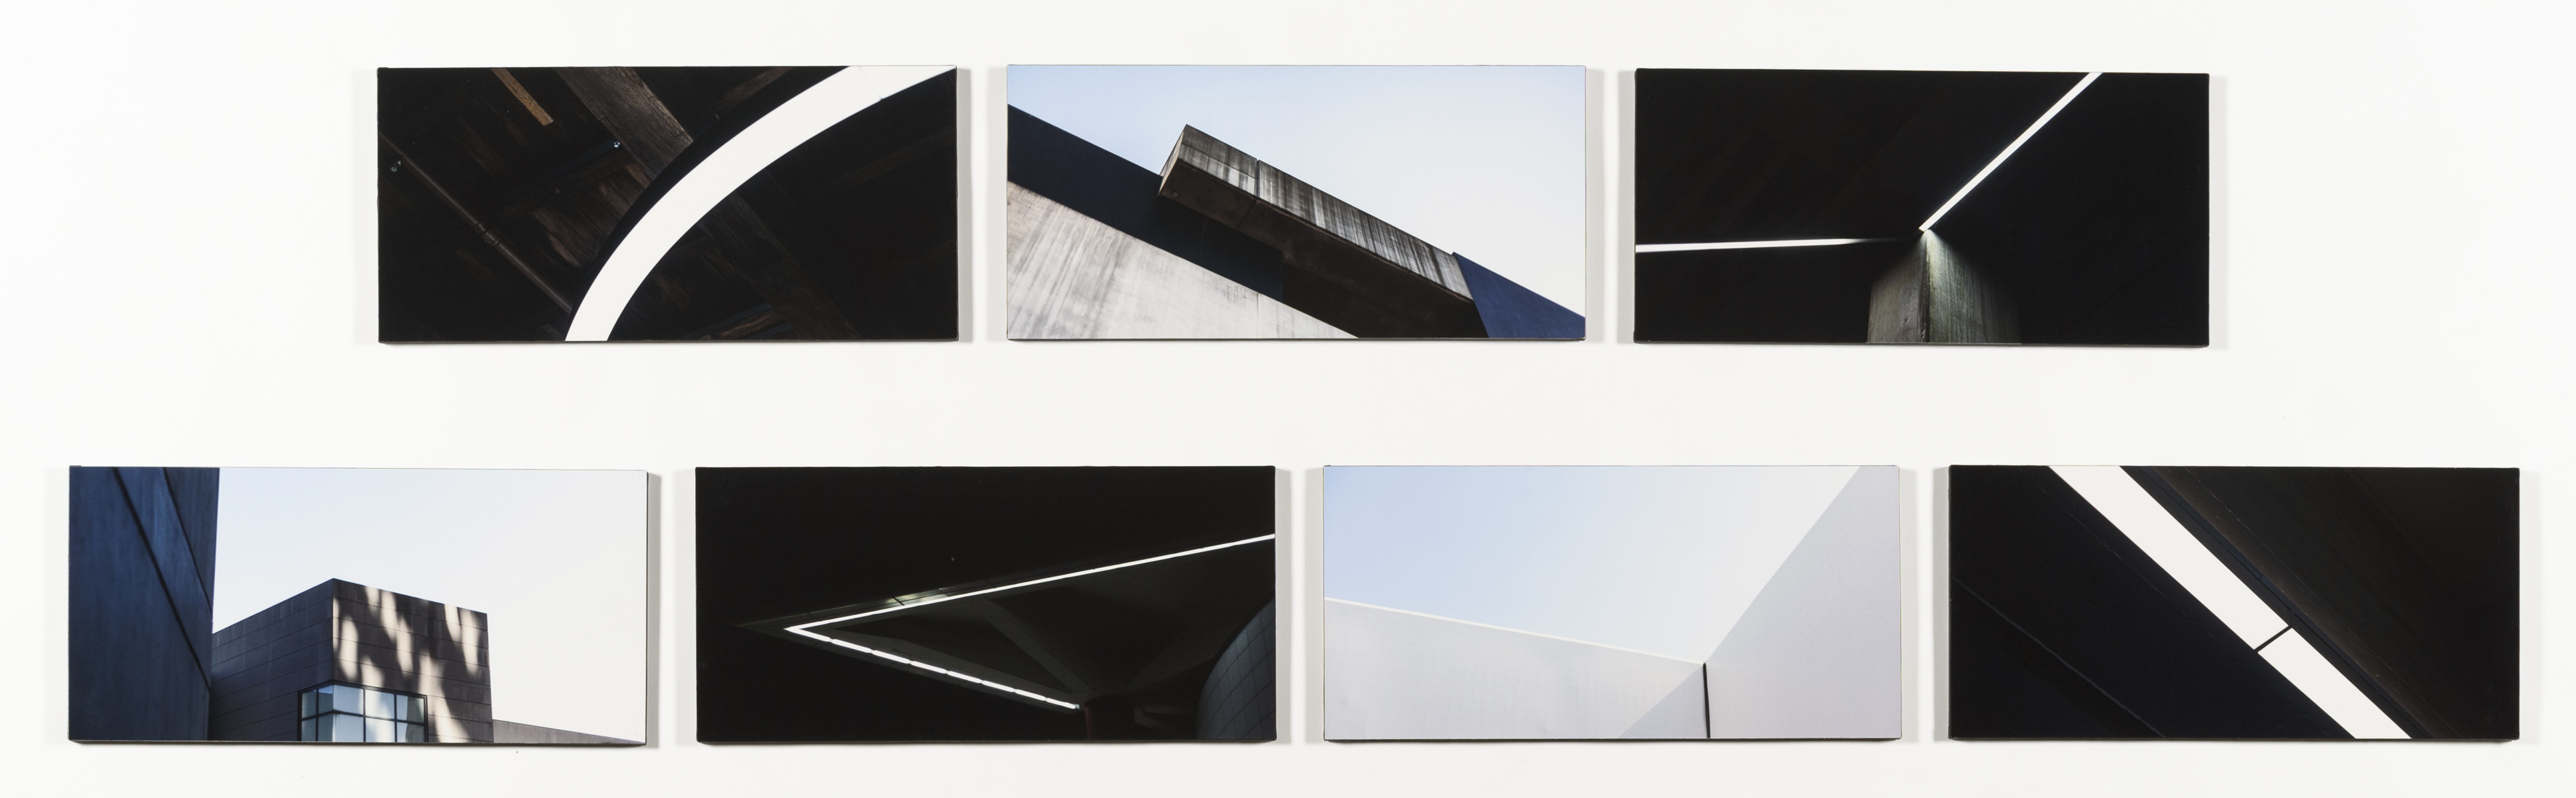 A series of seven close up photos of modern architecture.